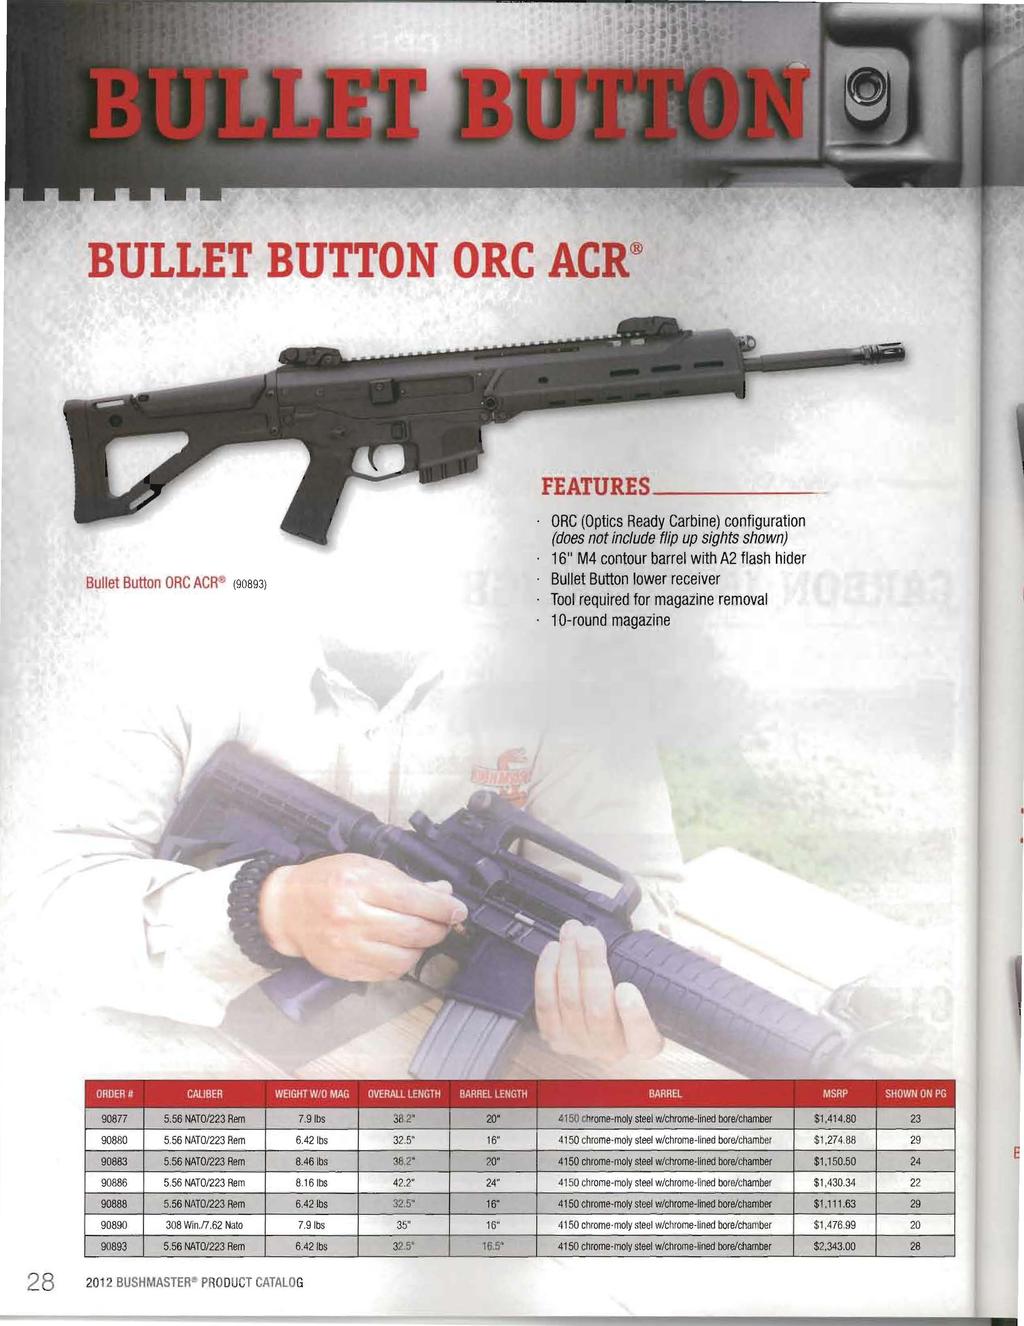 BULLET BUTTON ORC ACR FEATURES ORC (Optics Ready Carbine) configuration (does not include flip up sights shown) 16" M4 contour barrel with A2 flash hider Bullet Button ORC ACR~ (9089 3) Bullet Button